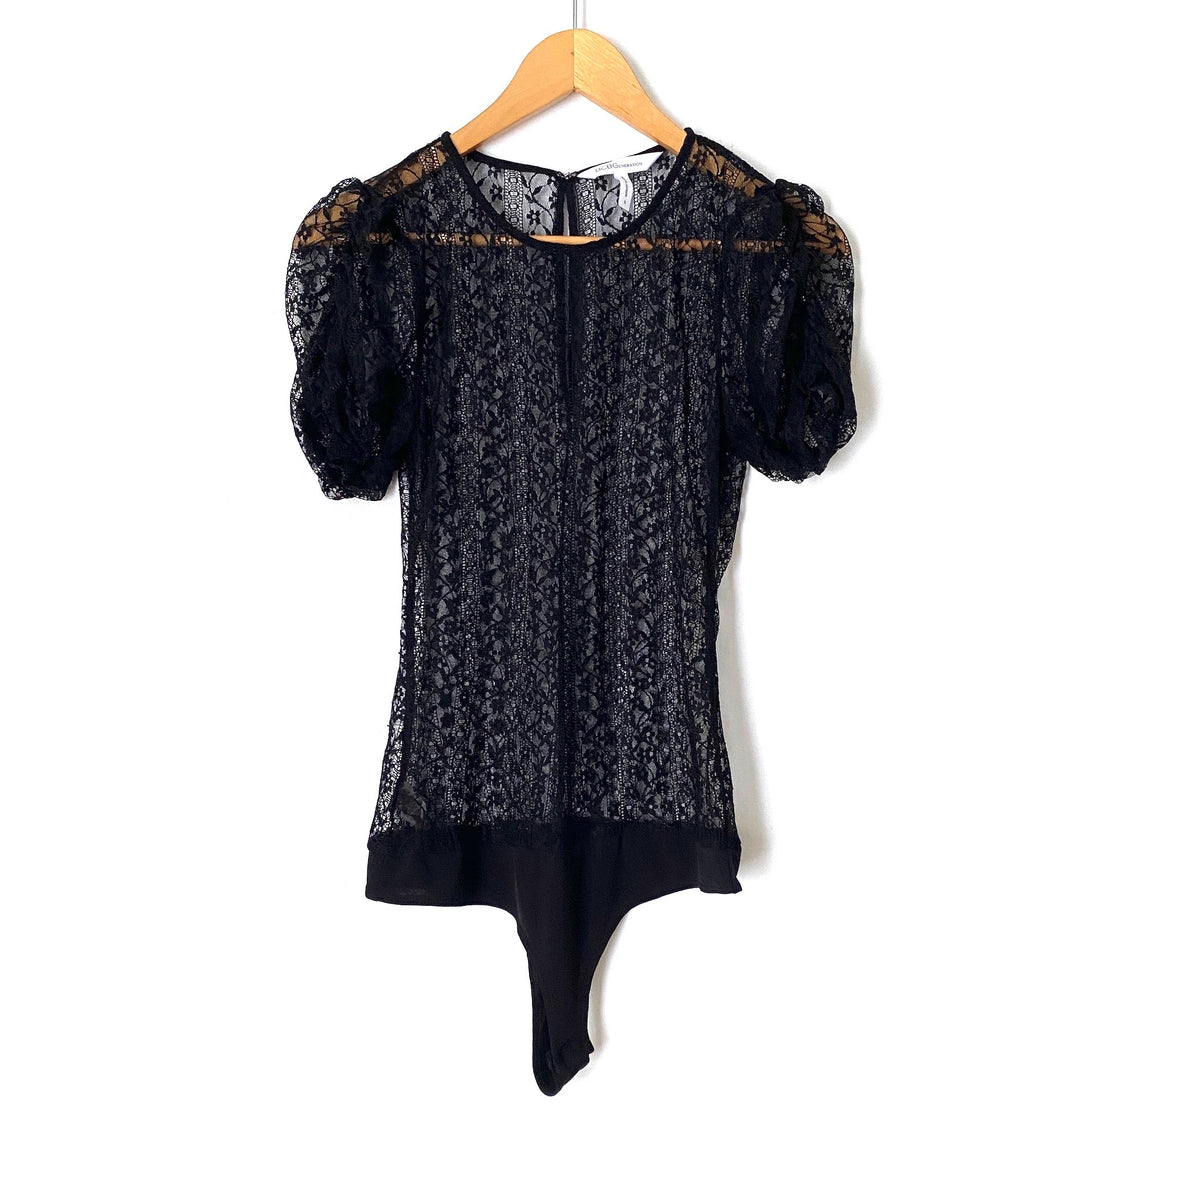 BCBG Black Sheer Lace Bodysuit- Size S – The Saved Collection